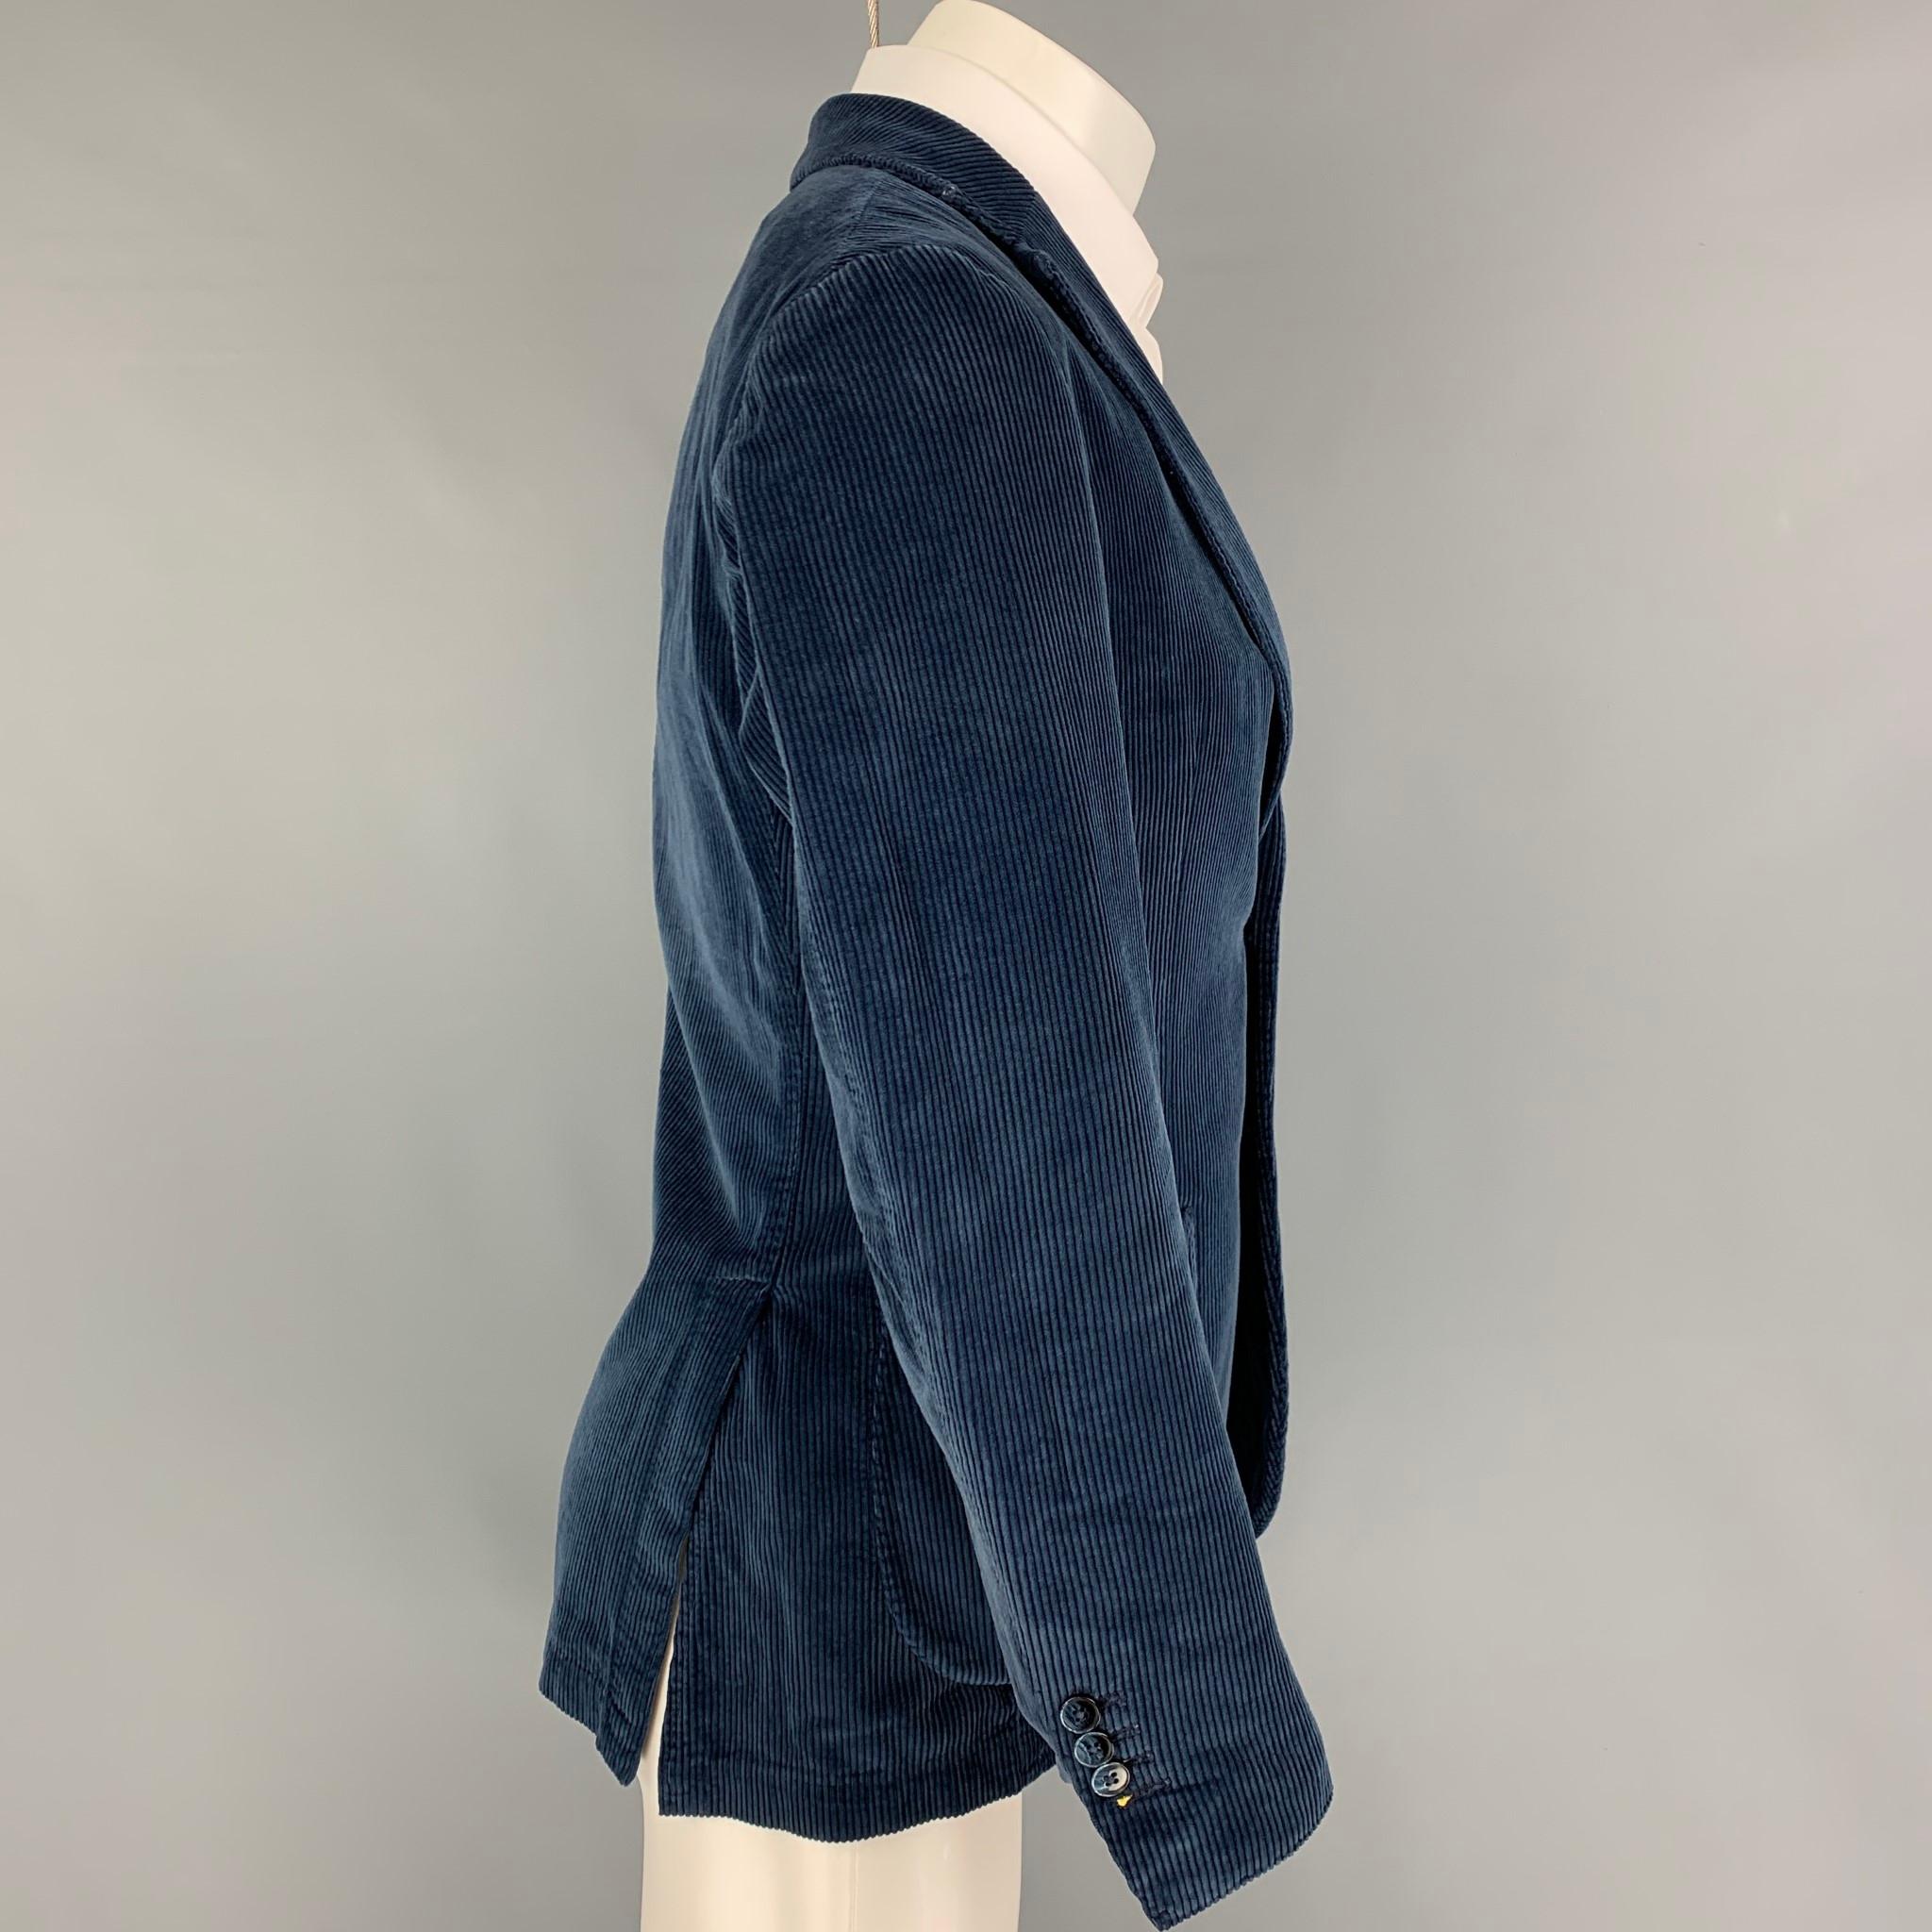 BRANDO sport coat comes in a blue corduroy cotton featuring a notch lapel, small flower pin, patch pockets, double back vent, and a double button closure. 

Very Good Pre-Owned Condition.
Marked: 46 R

Measurements:

Shoulder: 17 in.
Chest: 36